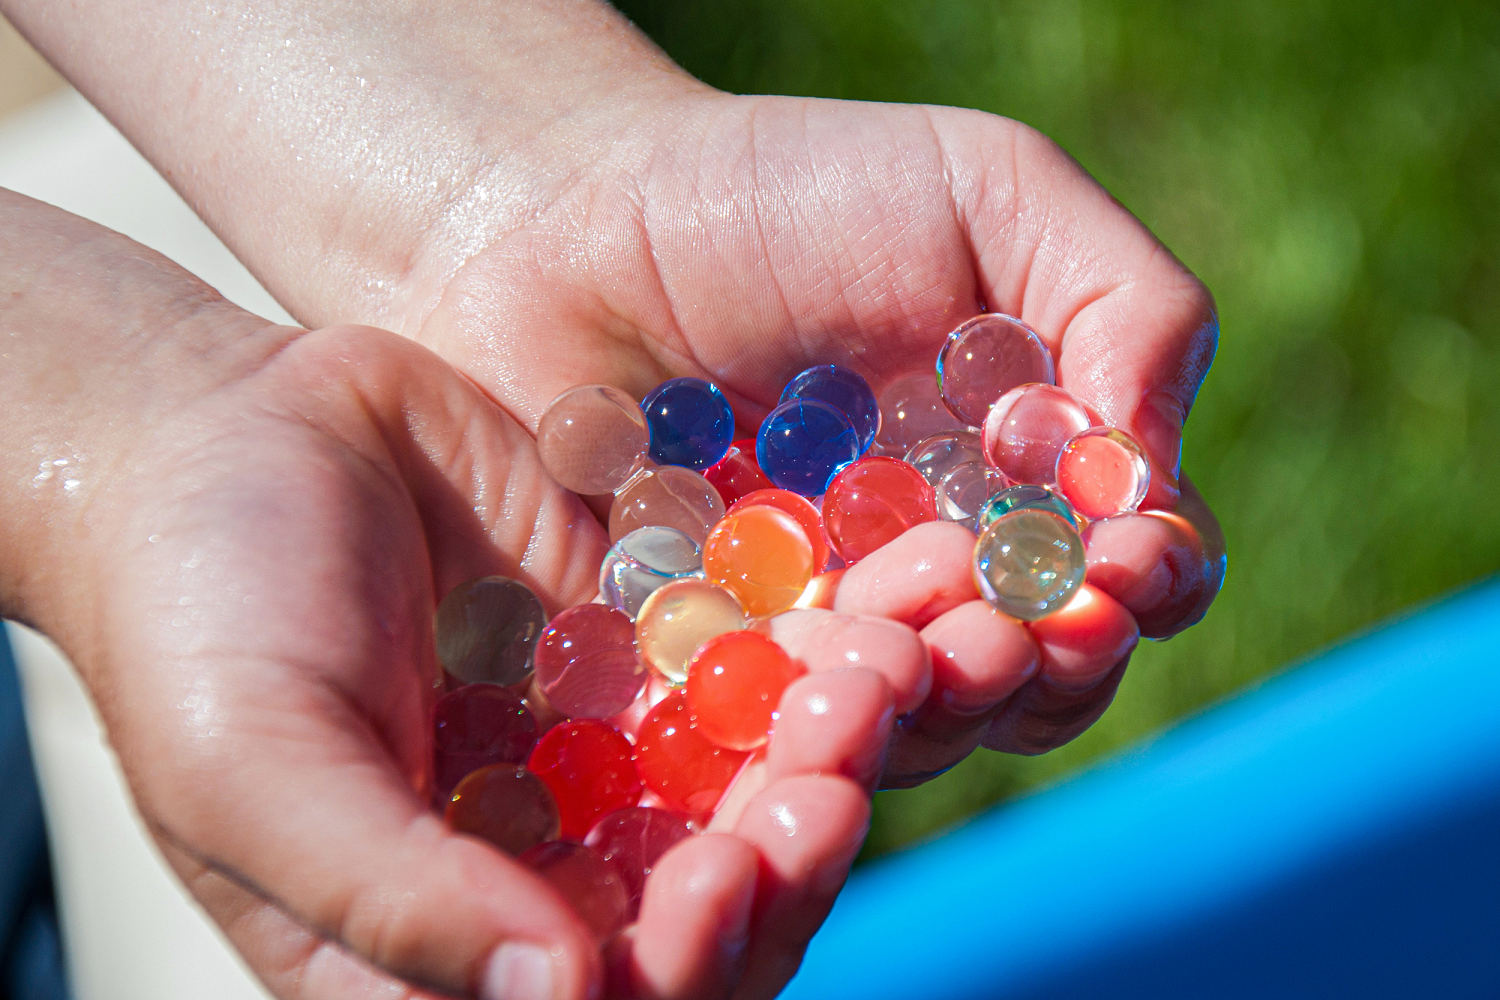 Bill aims to ban potentially hazardous water beads sold as children's toys